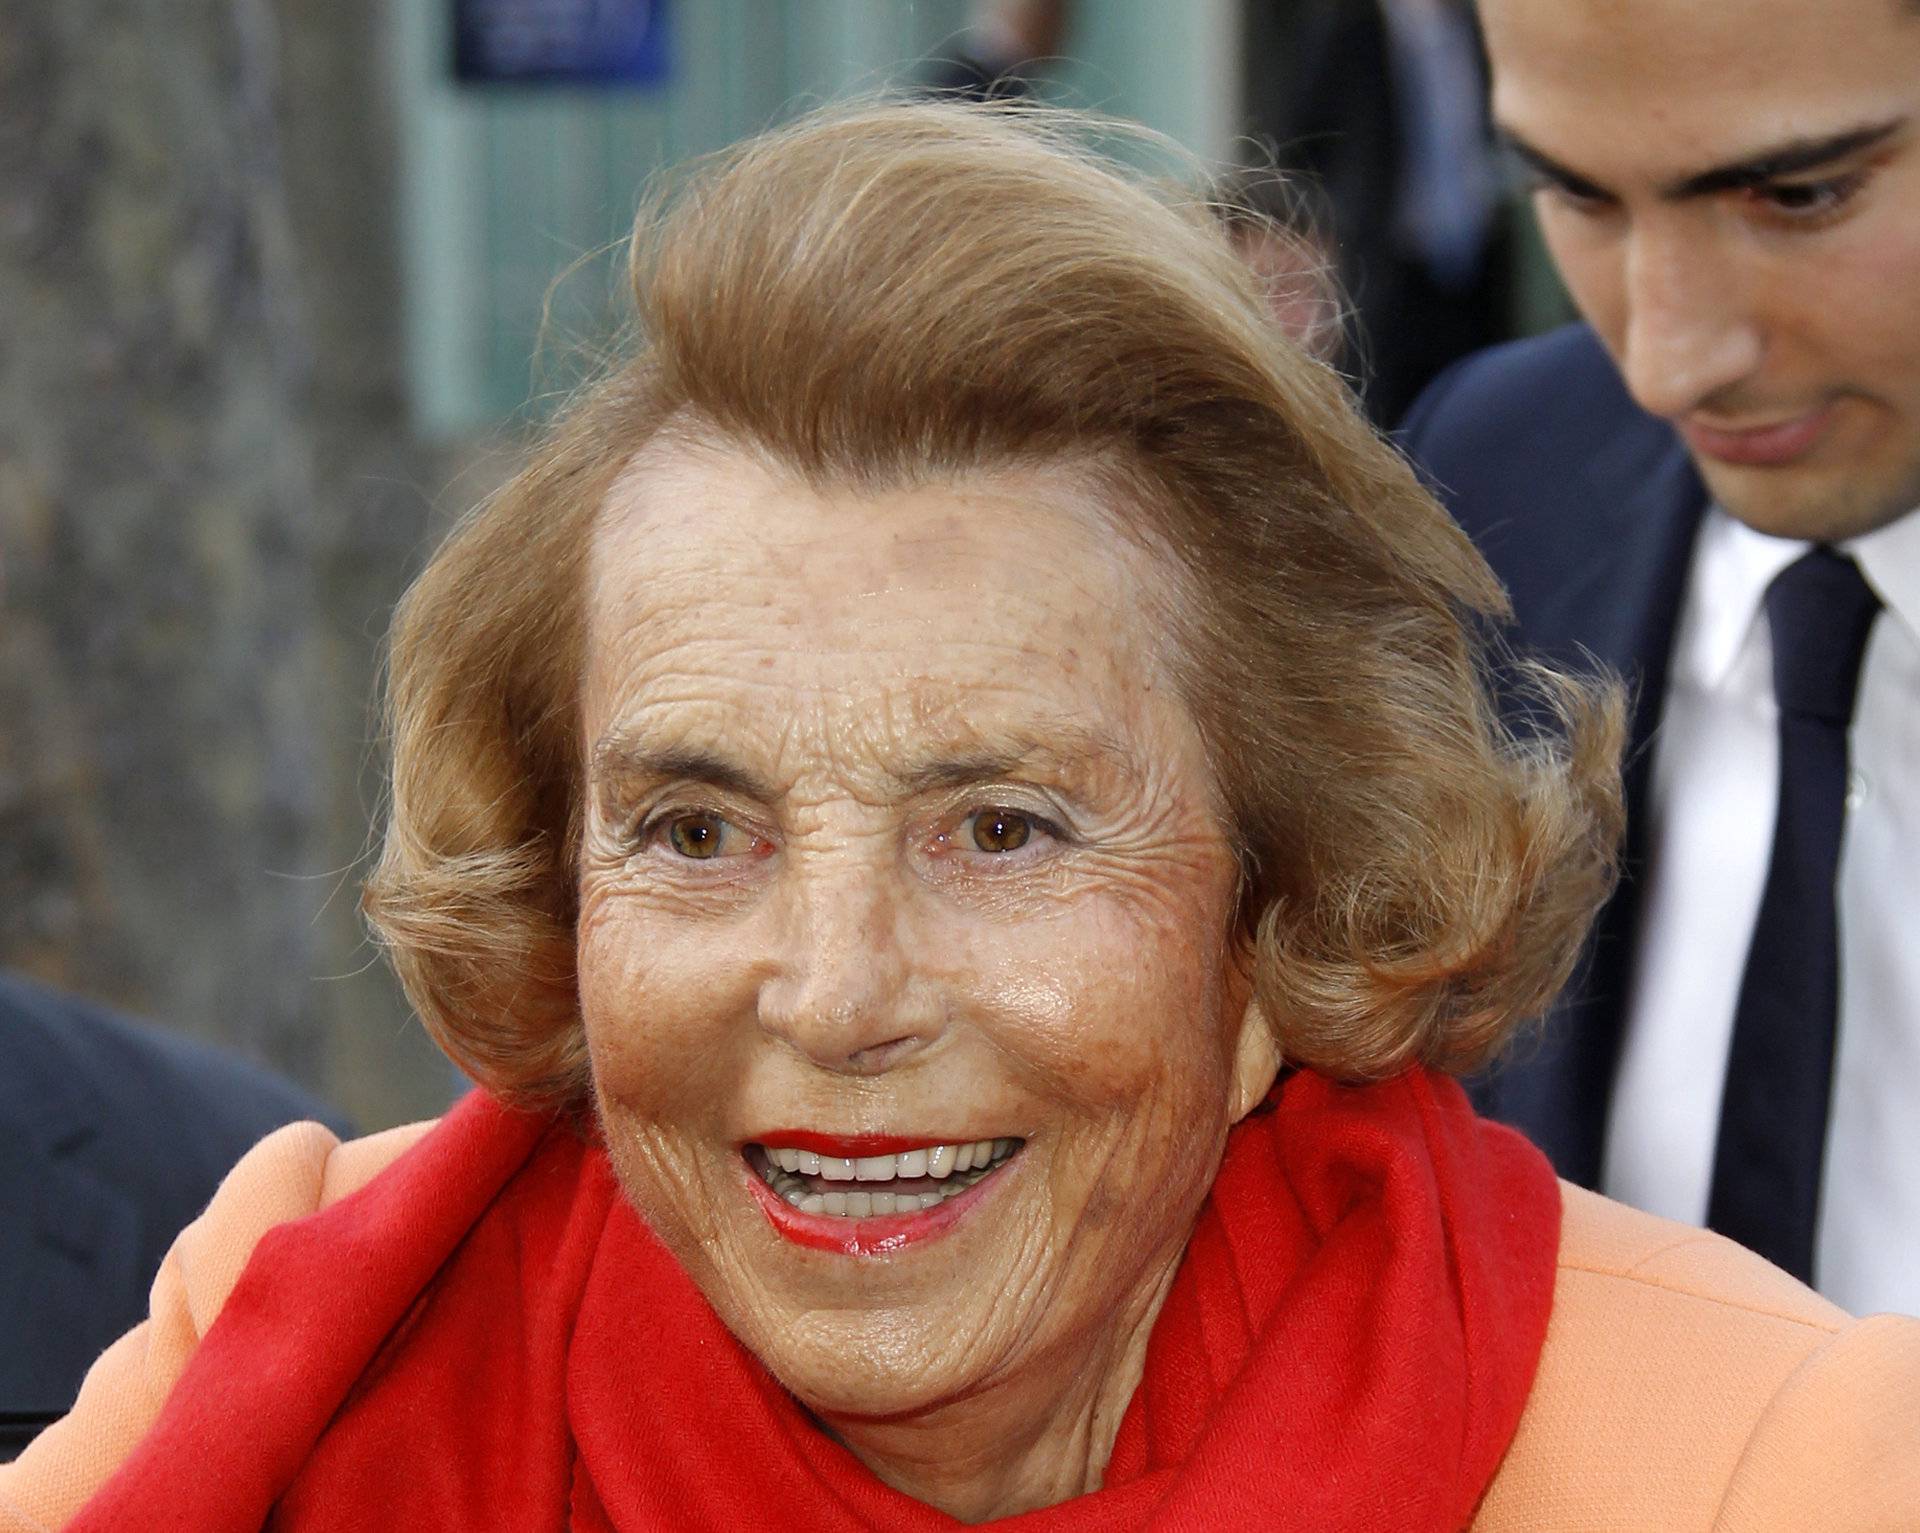 FILE PHOTO: Liliane Bettencourt, heiress to the L'Oreal fortune leaves with Jean-Victor Meyers, her grandson, the L'Oreal-UNESCO prize for women in Paris